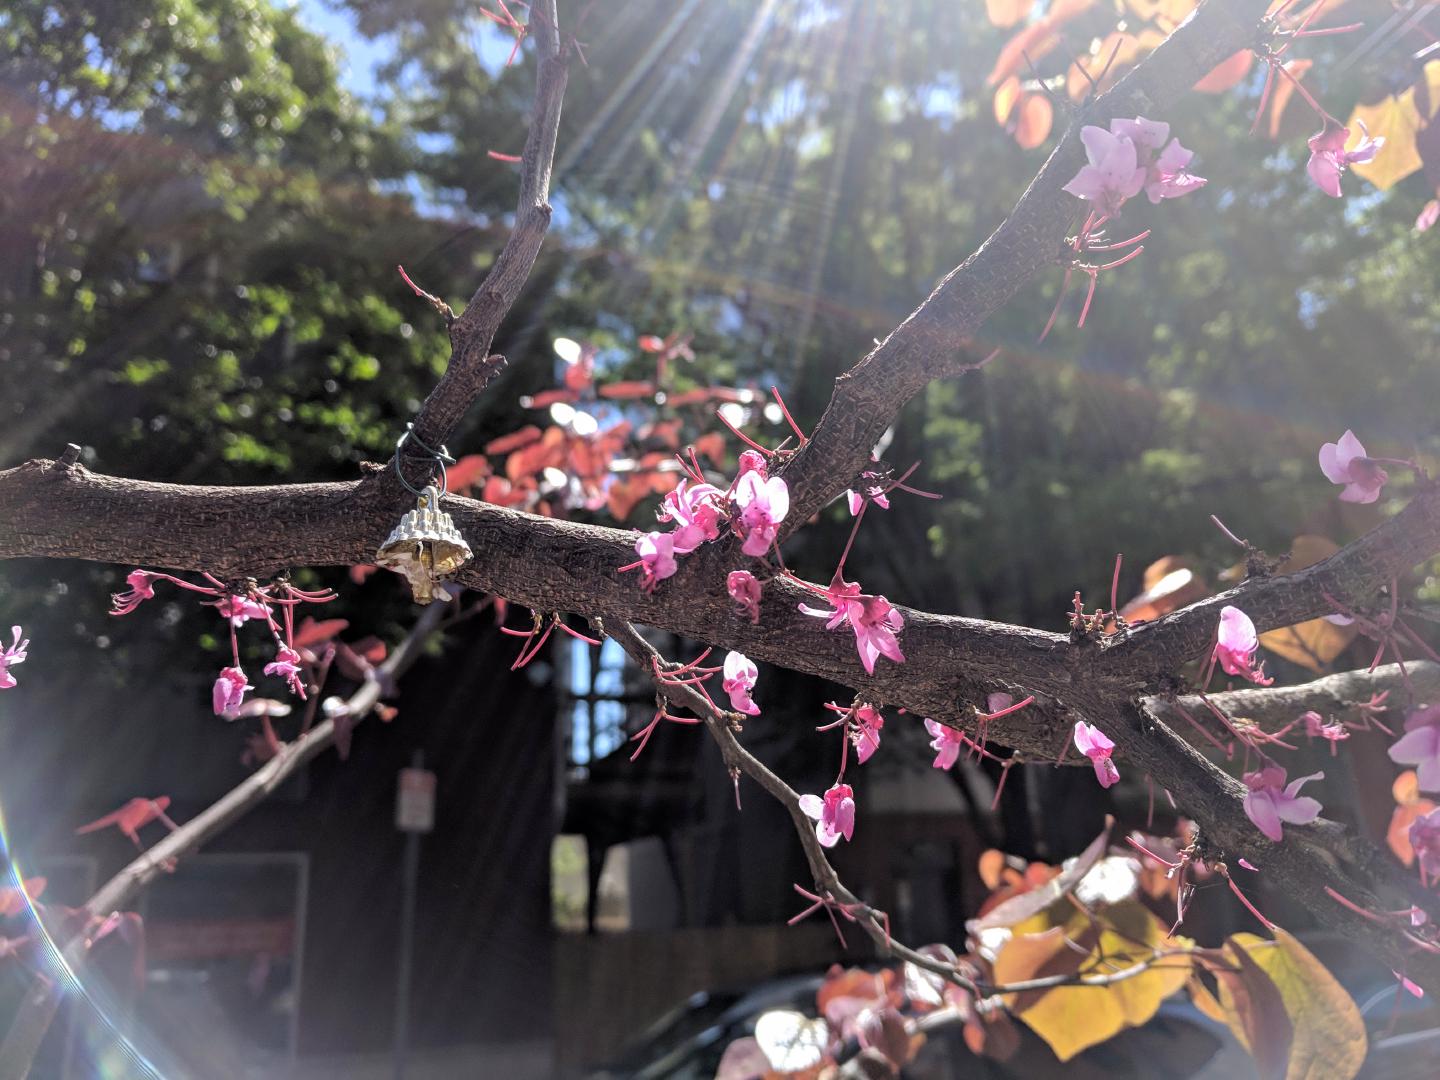 Sunlight causing lensflare effects around pretty pink blossoms on a tree.